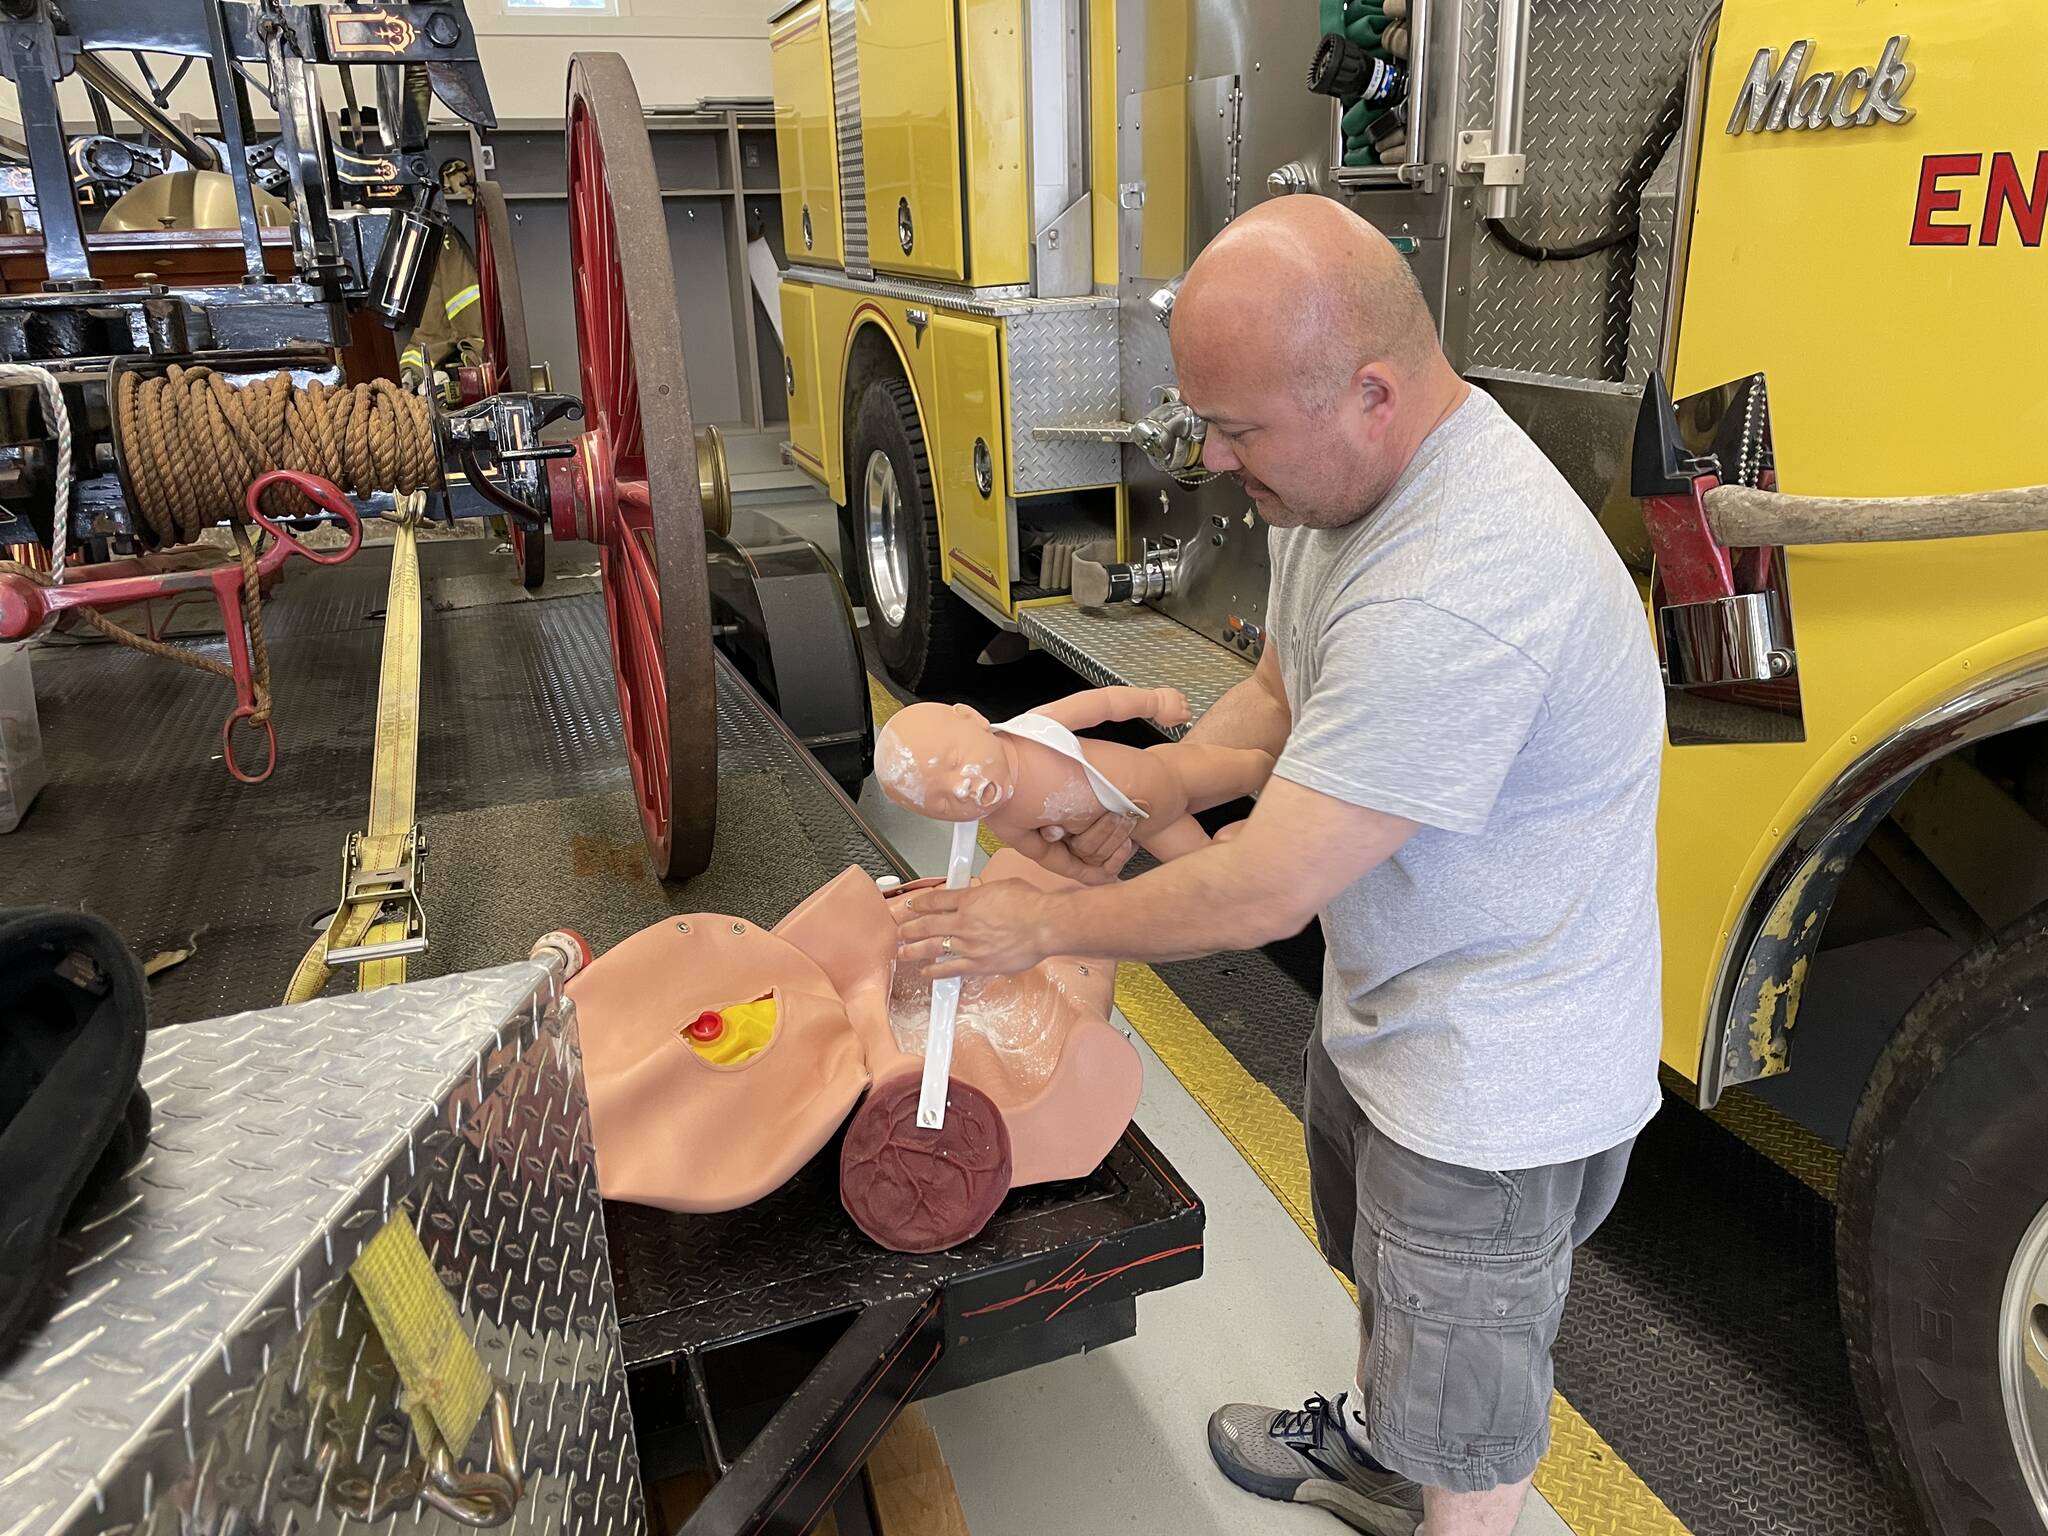 David Schrier, senior instructor for the county’s EMT academy readies the birth simulator mannequin for the next scenario during the EMT academy.